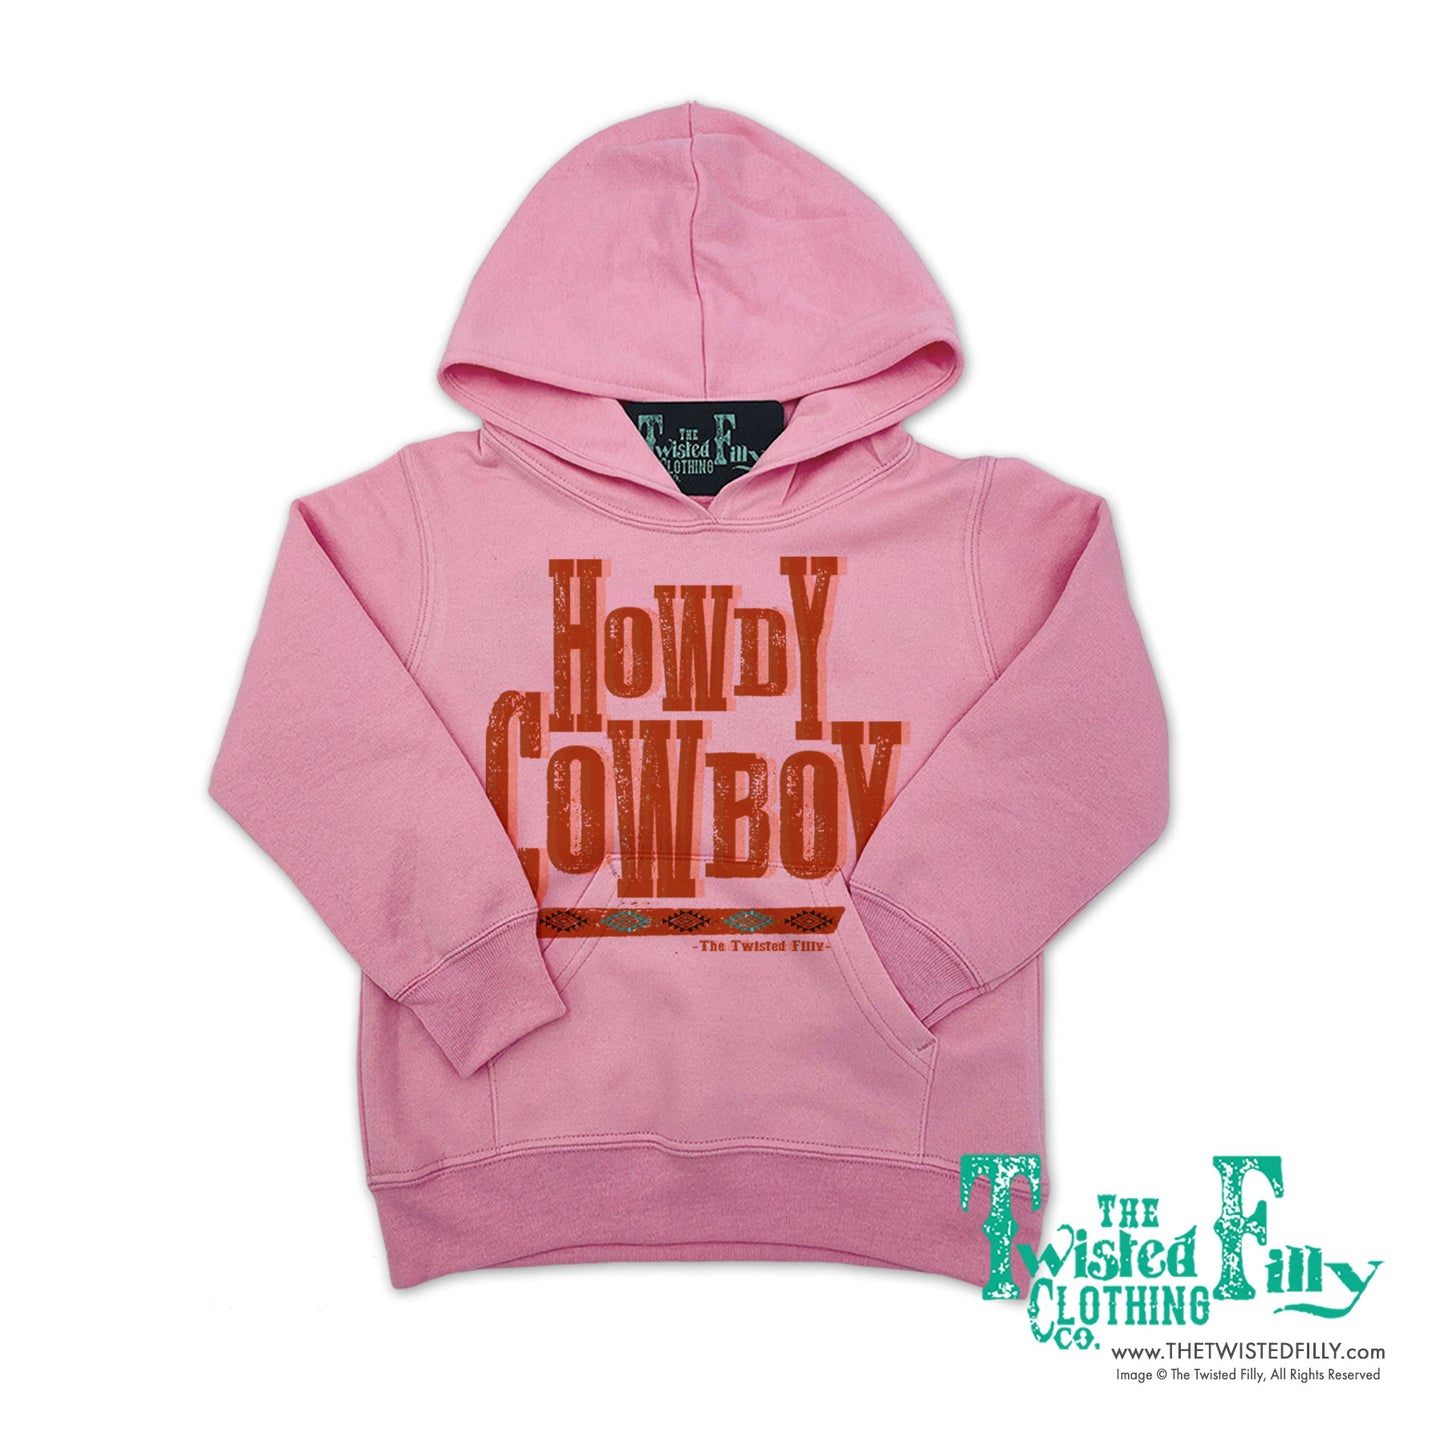 Howdy Cowboy - Toddler Girls Hoodie - Assorted Colors